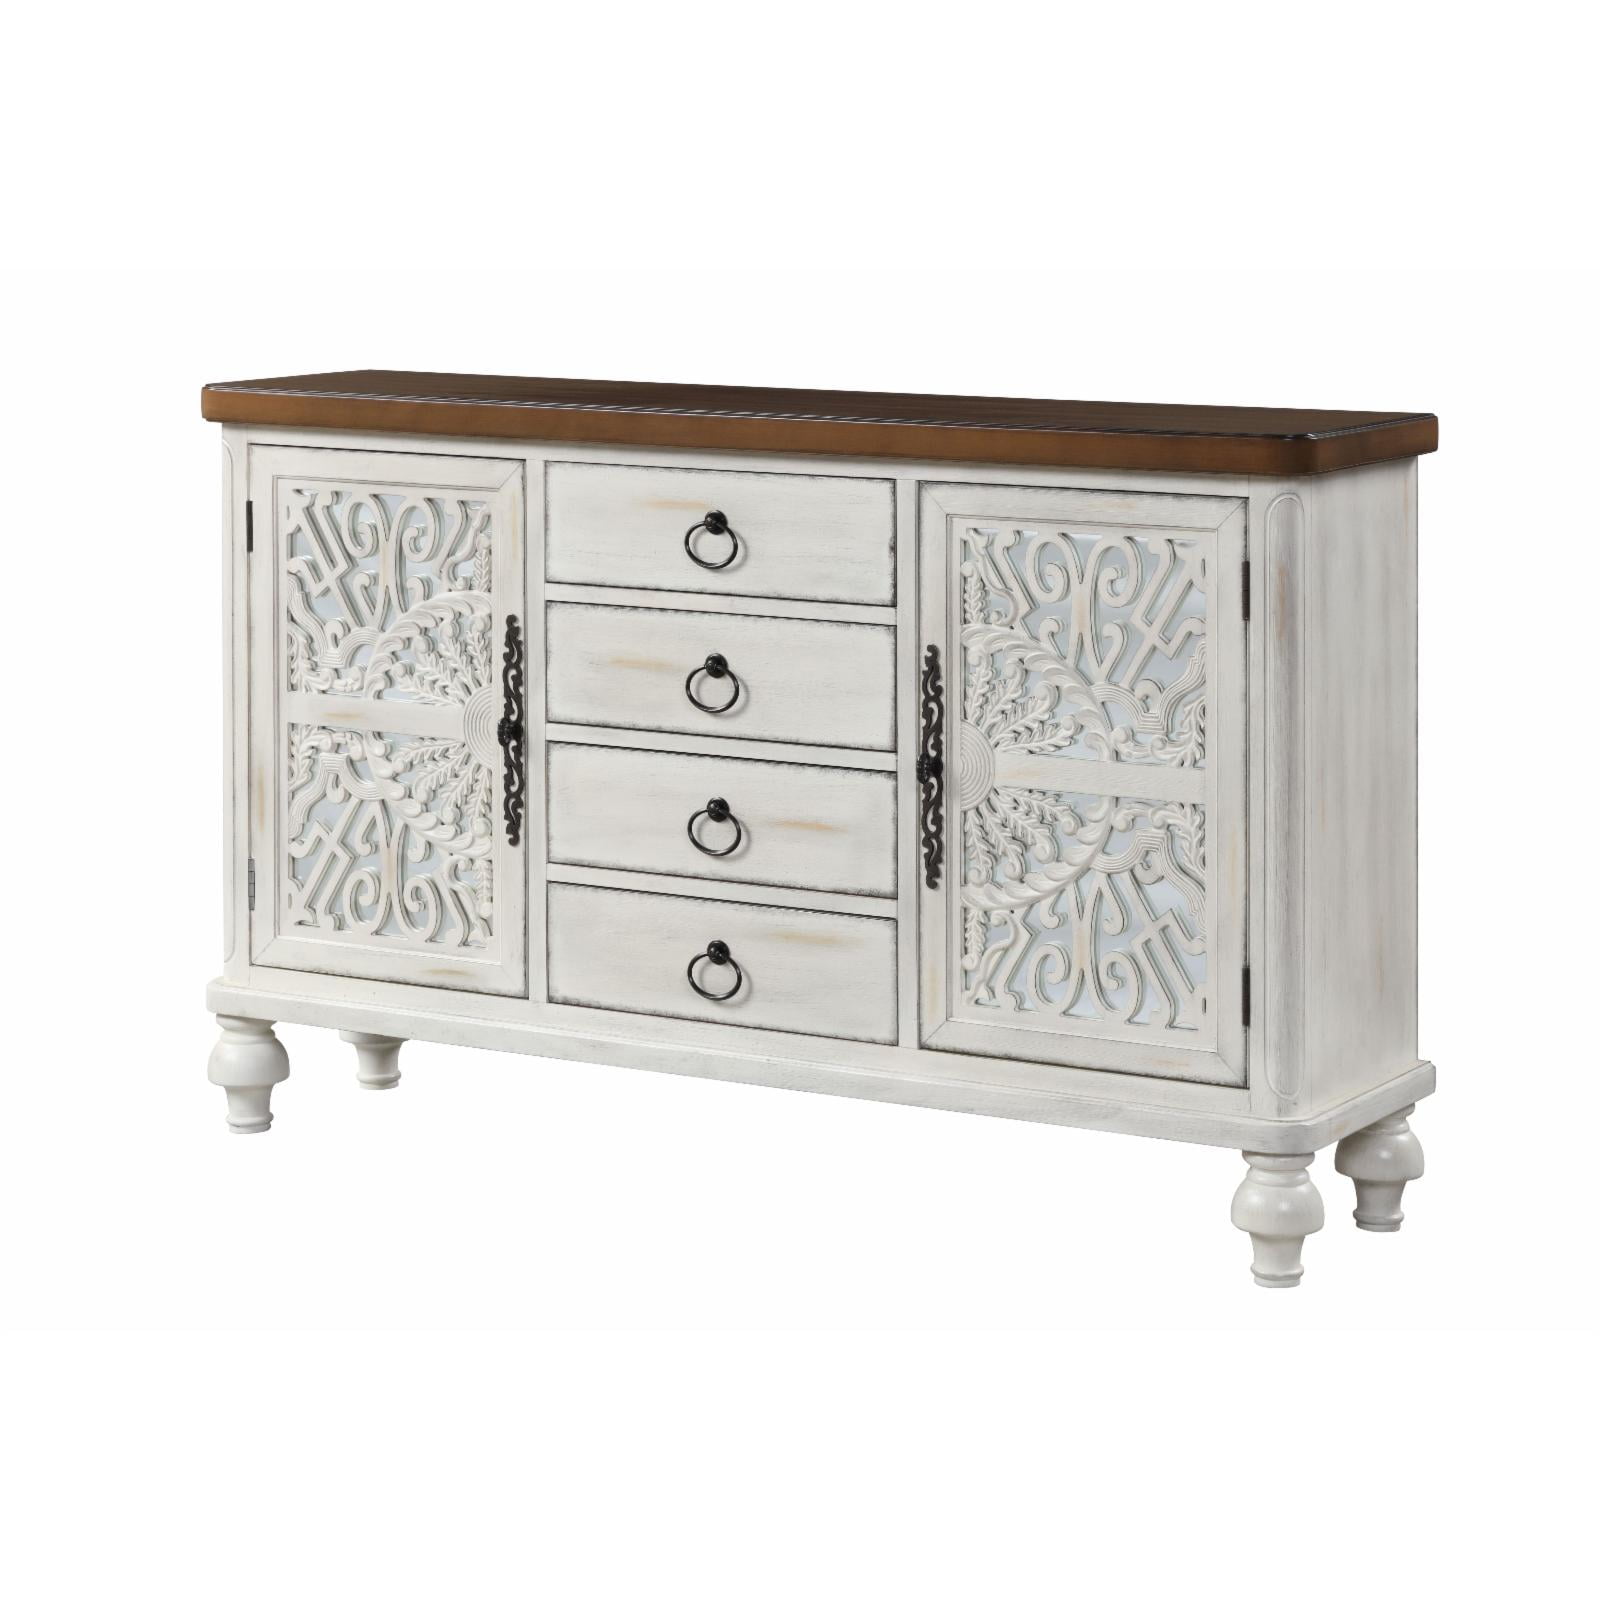 Picture of ACME 90288 Vermont Console Table, Antique White - 38 x 60 x 15 in.